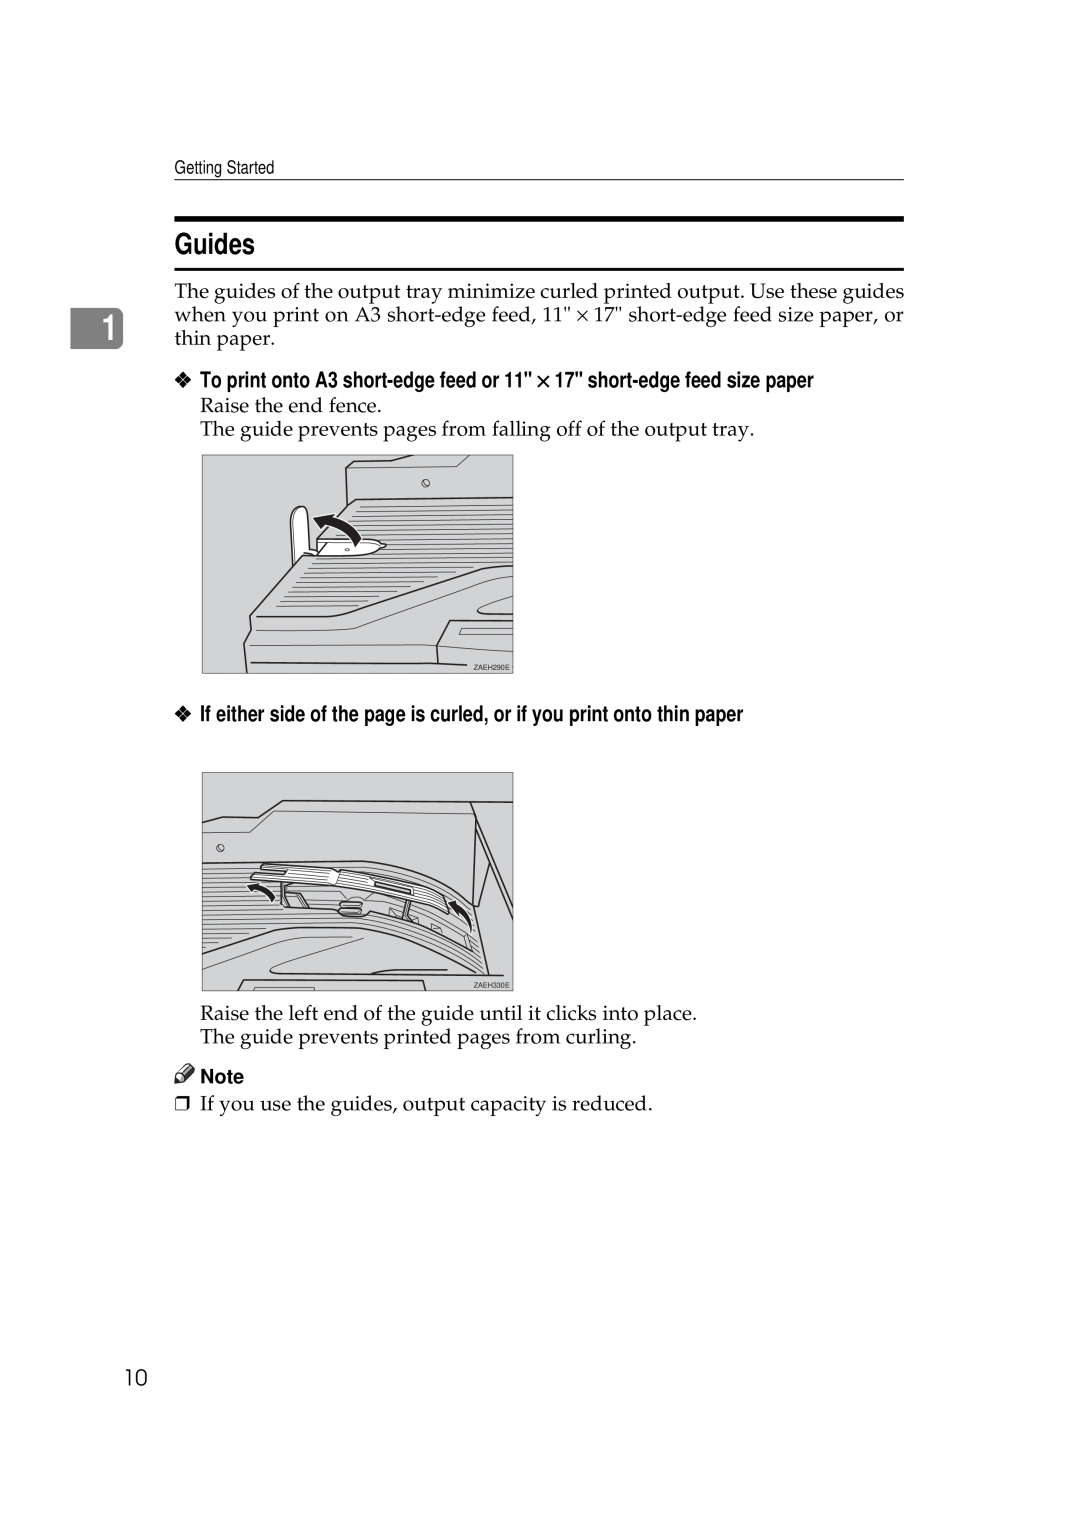 Ricoh Aficio AP2700 operating instructions Guides, If either side of the page is curled, or if you print onto thin paper 